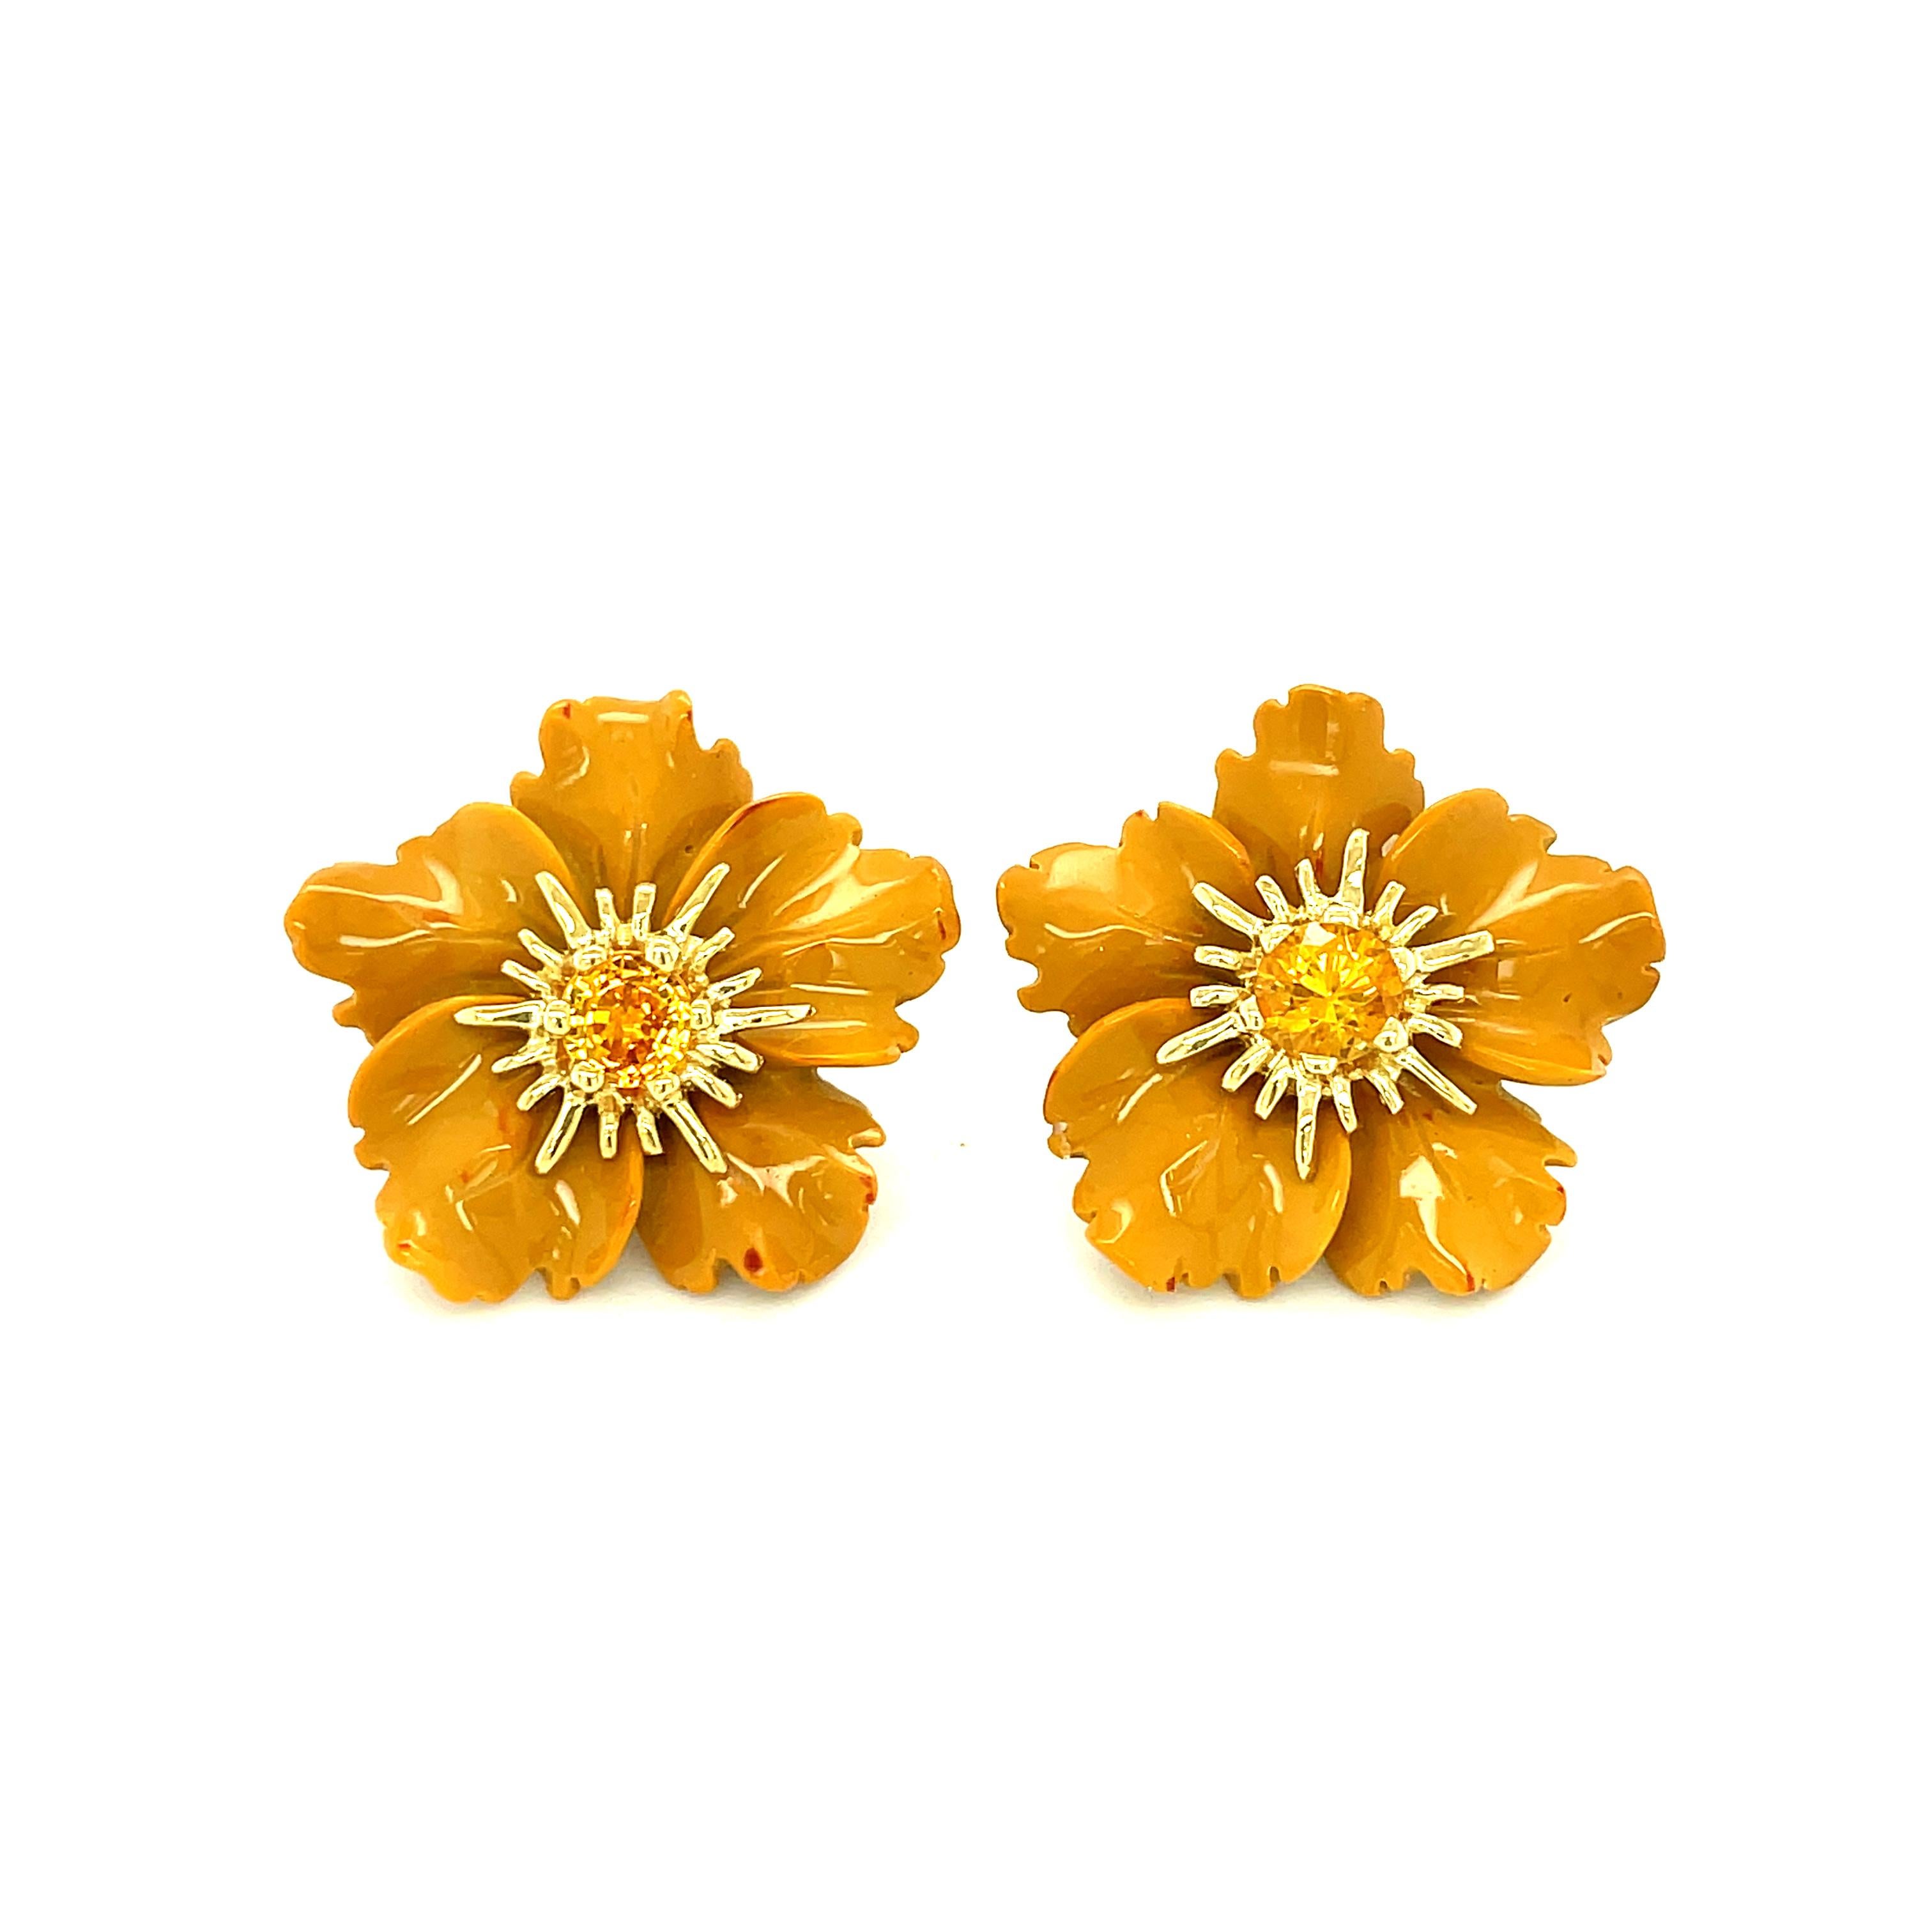 Carved Jasper Flower Earring Jacket with Yellow Sapphire and Gold Stamen Posts For Sale 8